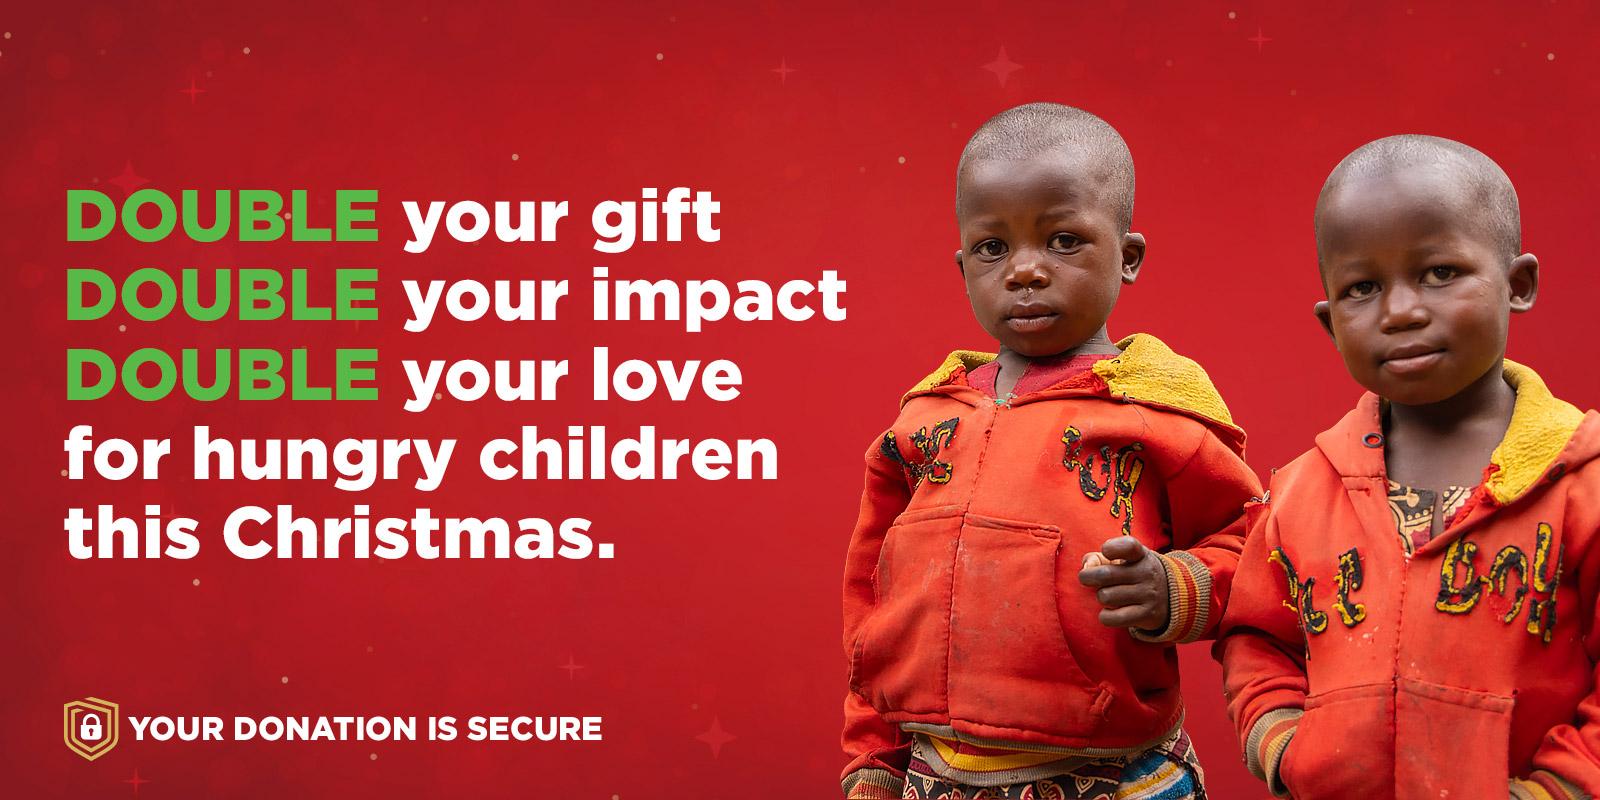 Double your gift for hungry children this Christmas.